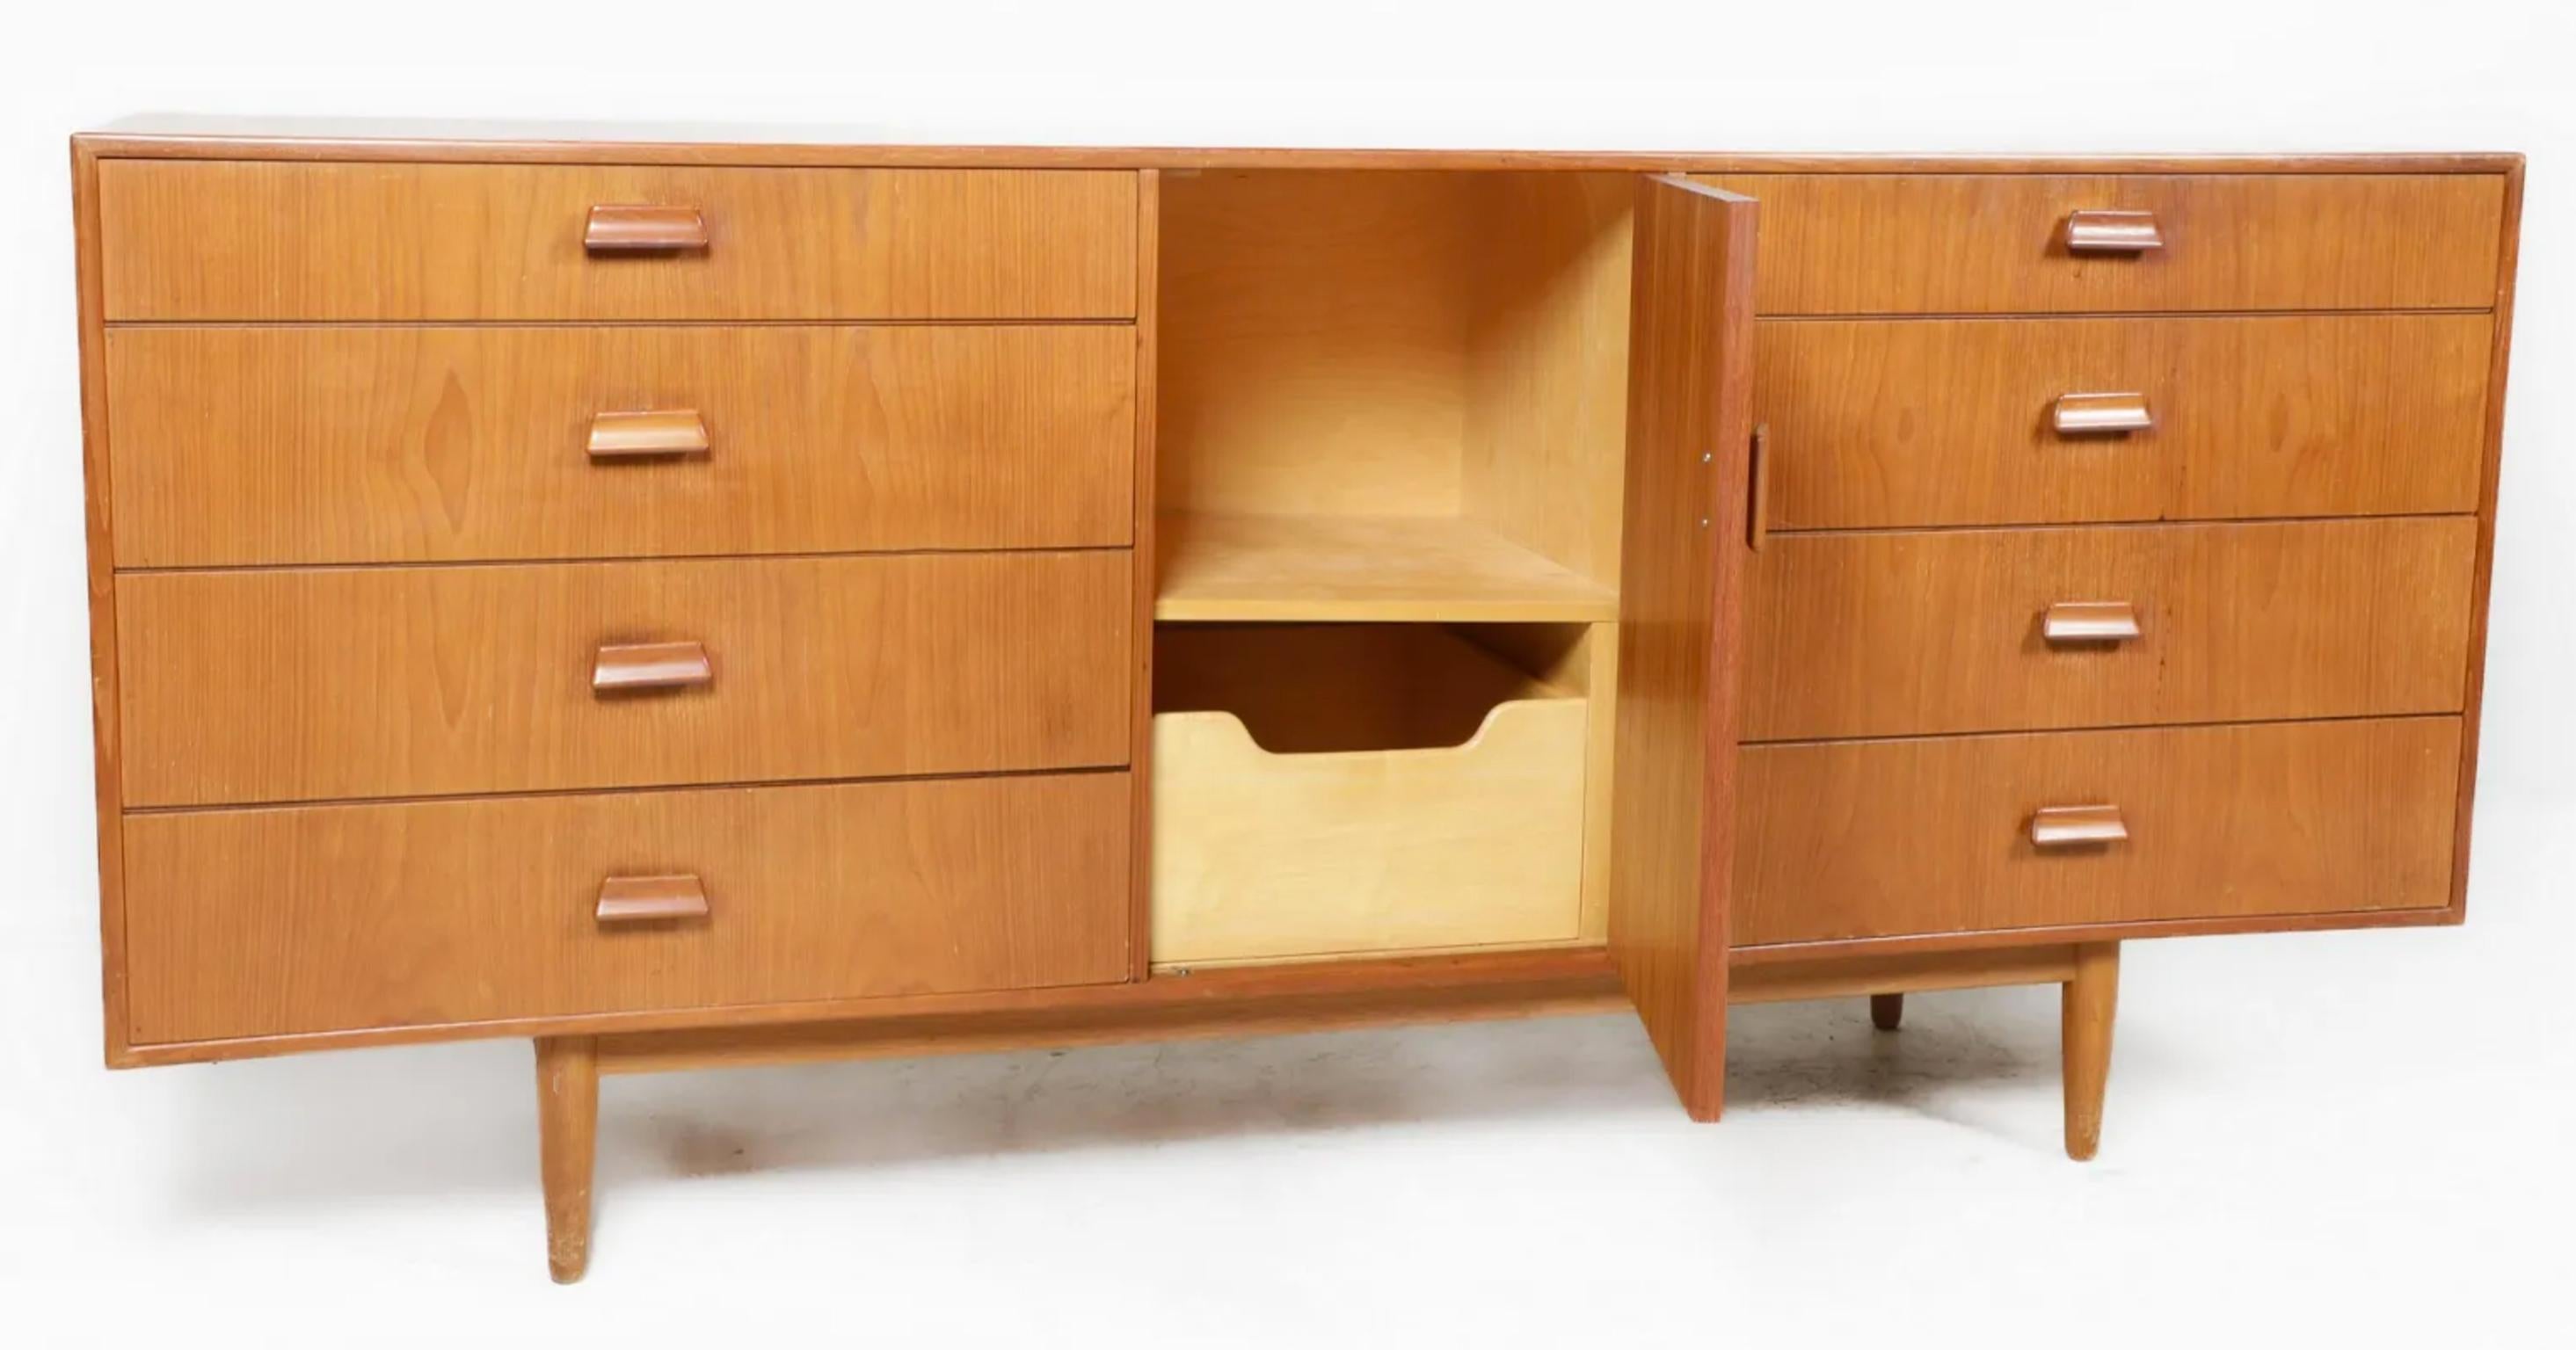 Mid century Danish Modern Teak credenza dresser by Torben Strandgaard Danish Modern teak sideboard center door with pull out drawer and shelf flanked by 8 drawers. Beautiful teak carved handles. Made in Denmark. Located in Brooklyn NYC

Measures